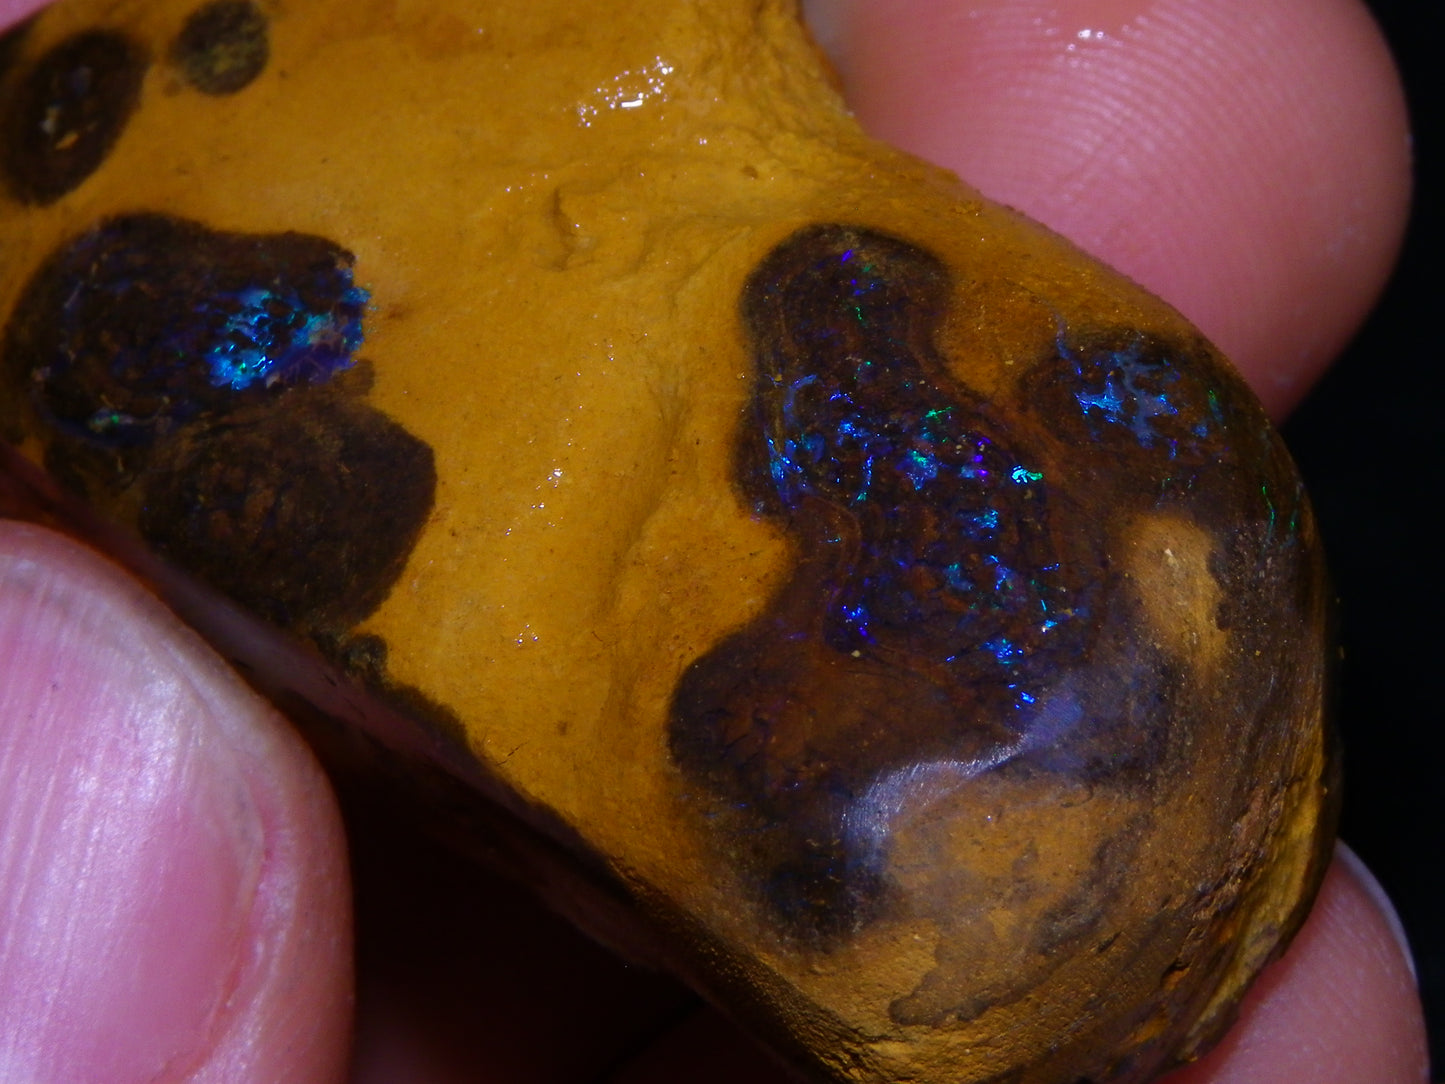 2 NIce rubbed Matrix Opal Specimens 371cts Queensland Australia Some Fires